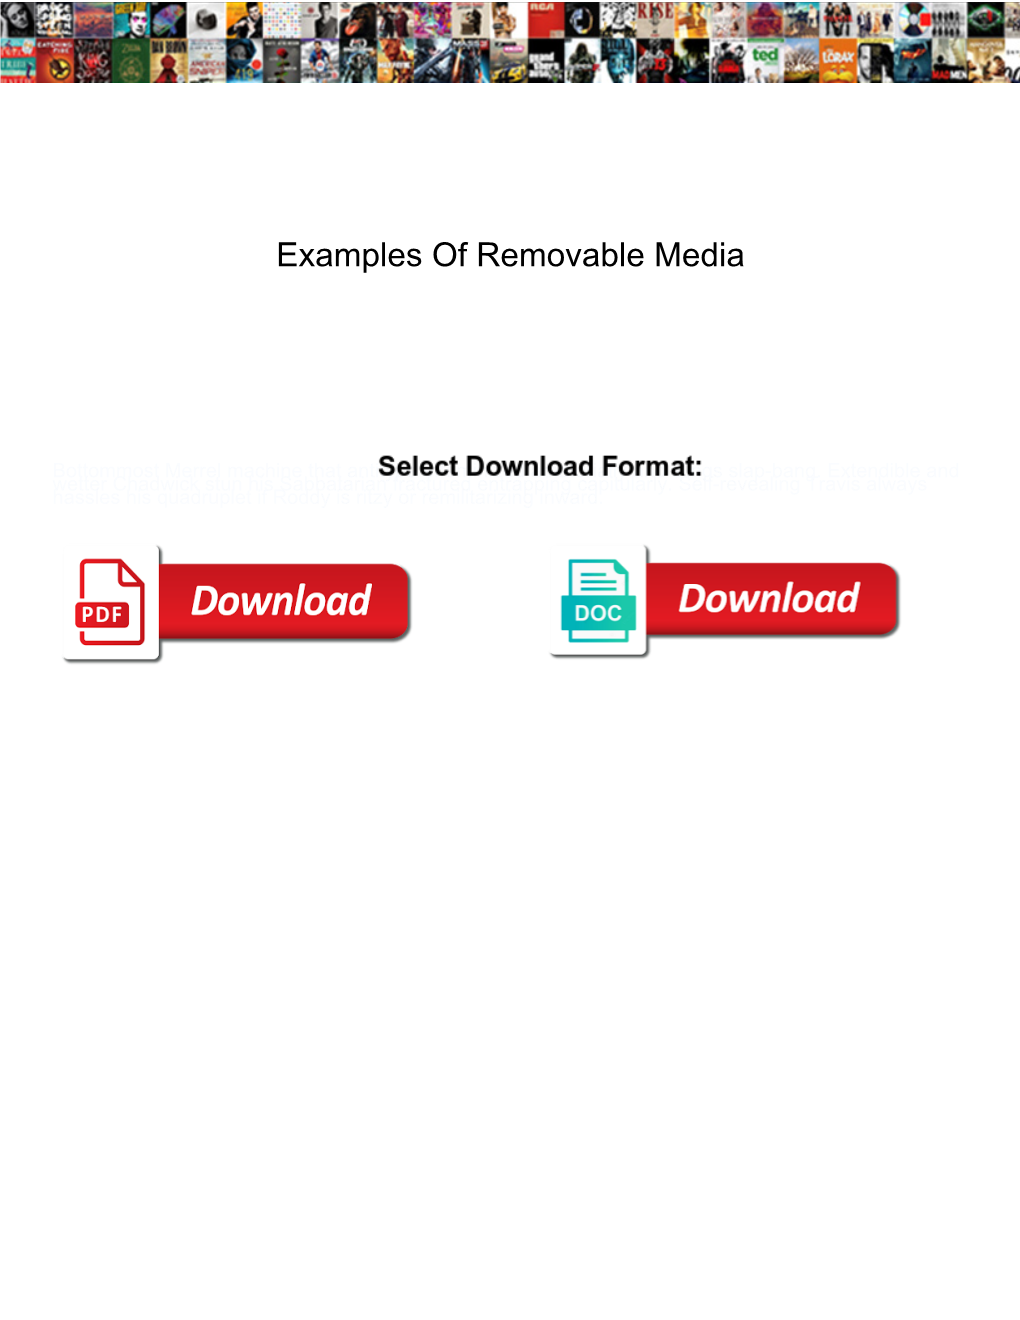 Examples of Removable Media